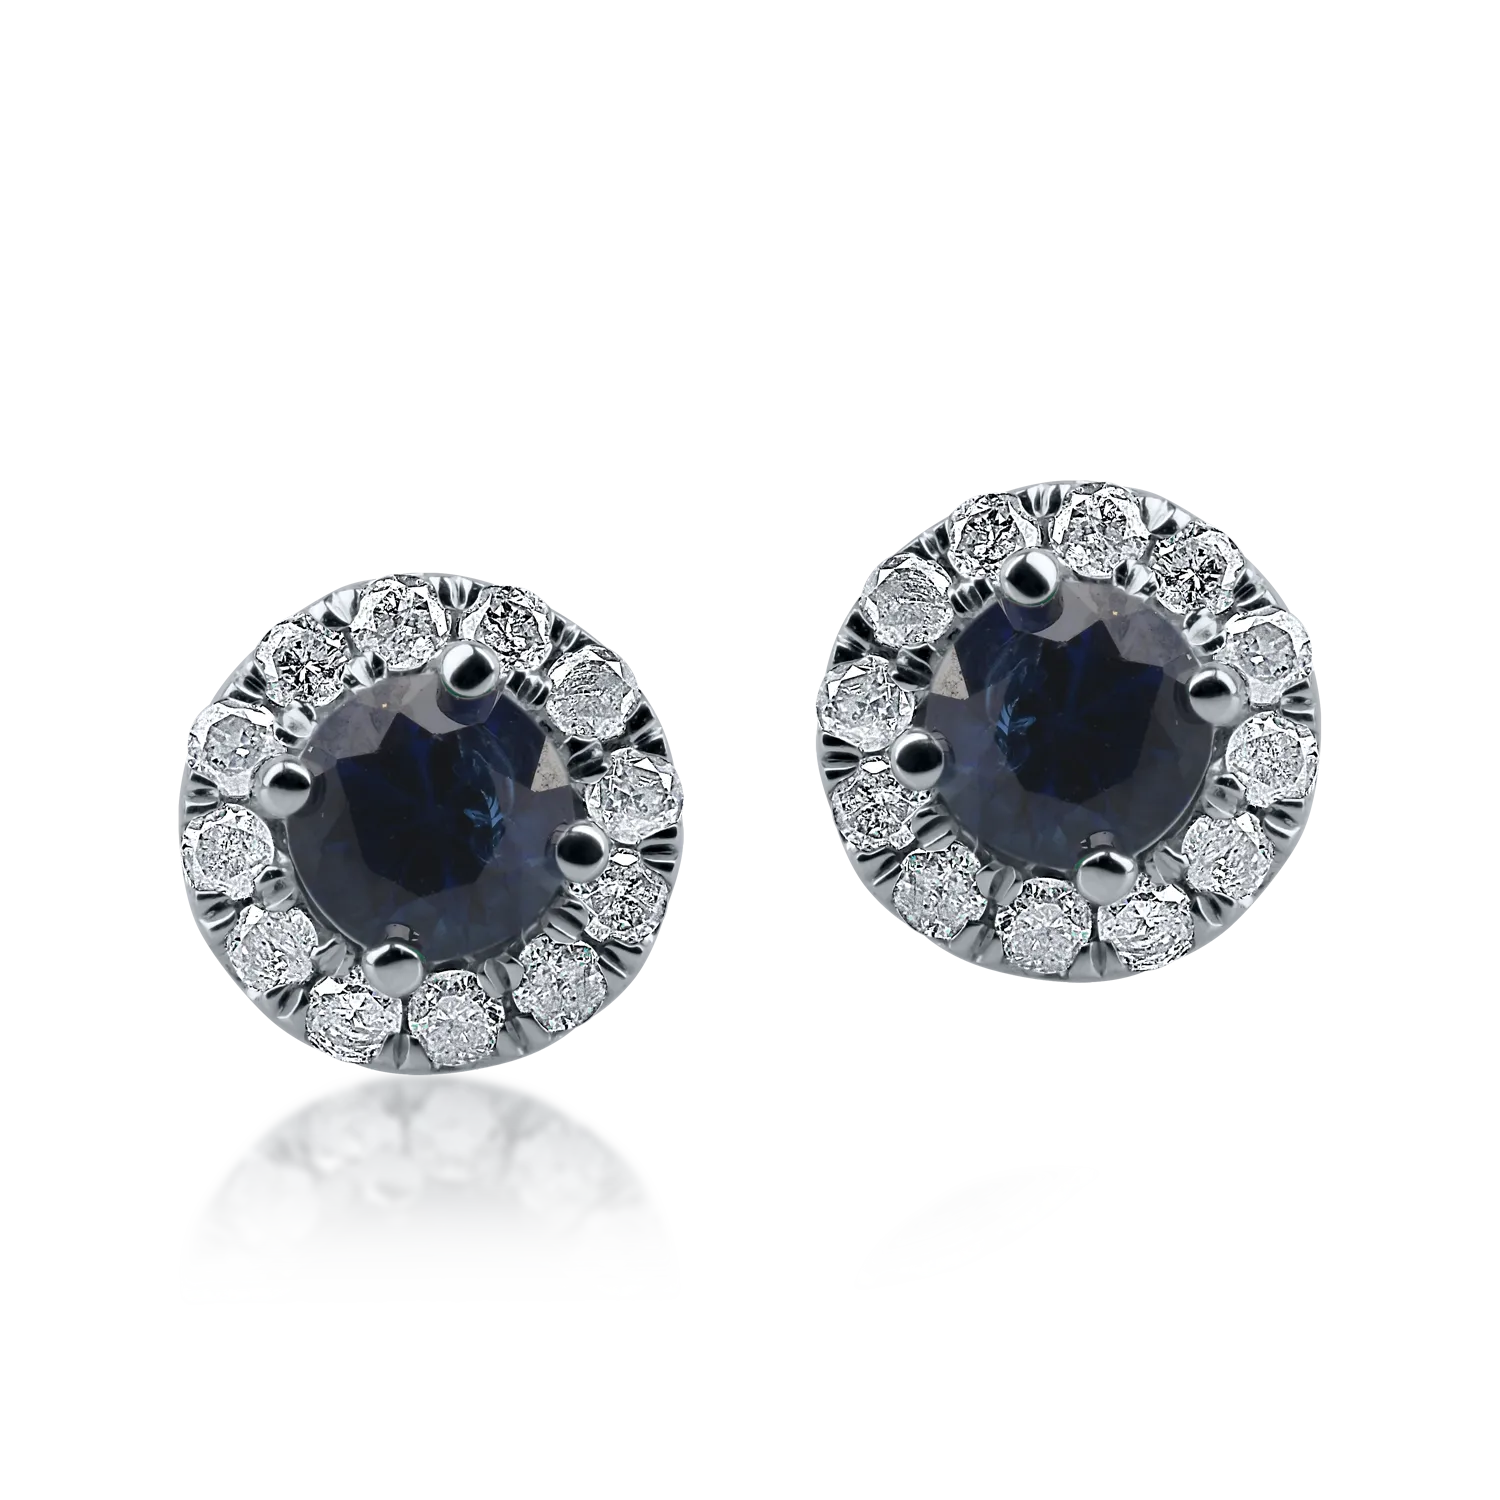 White gold earrings with 0.45ct heated sapphires and 0.19ct diamonds